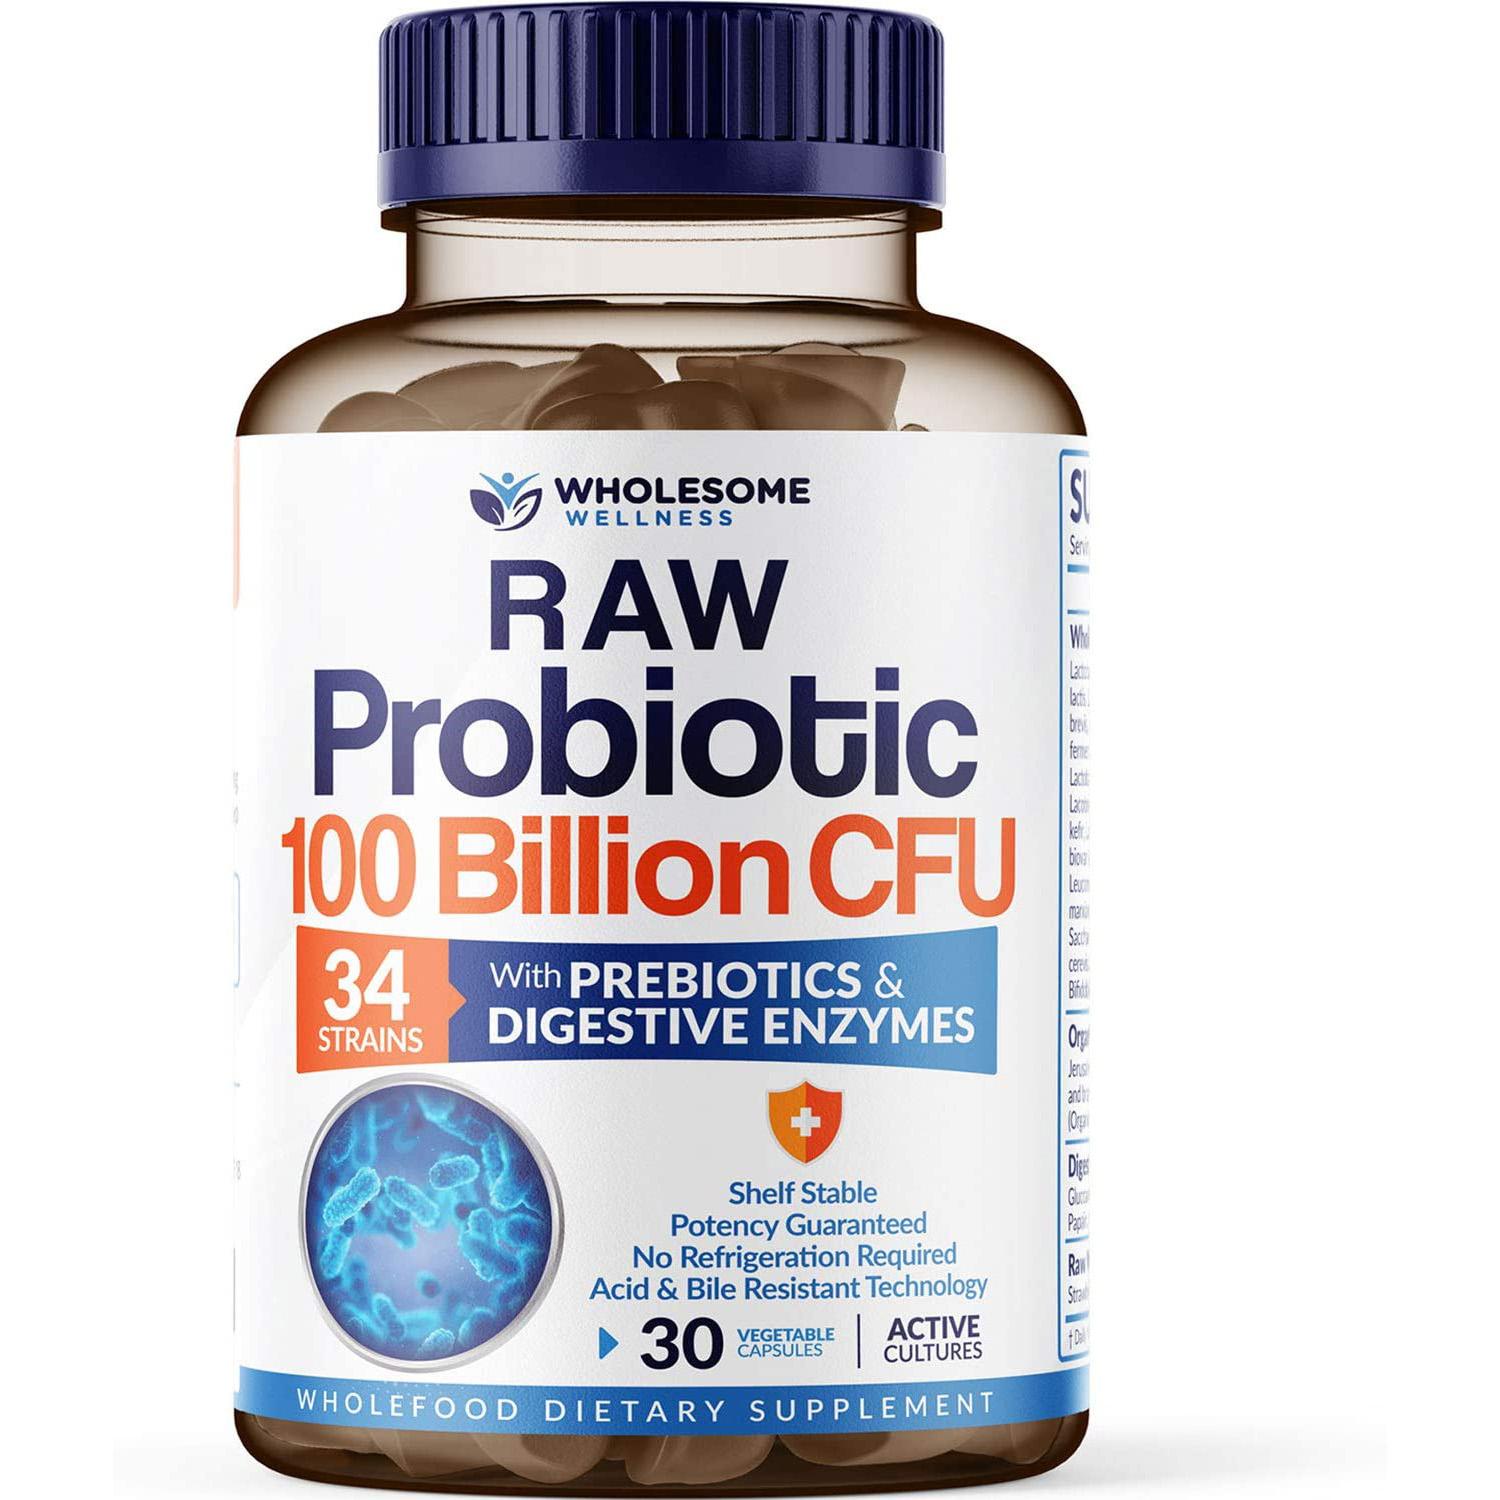 Wholesome Wellness Adult Organic Probiotic Supplement for $14.99 Shipped